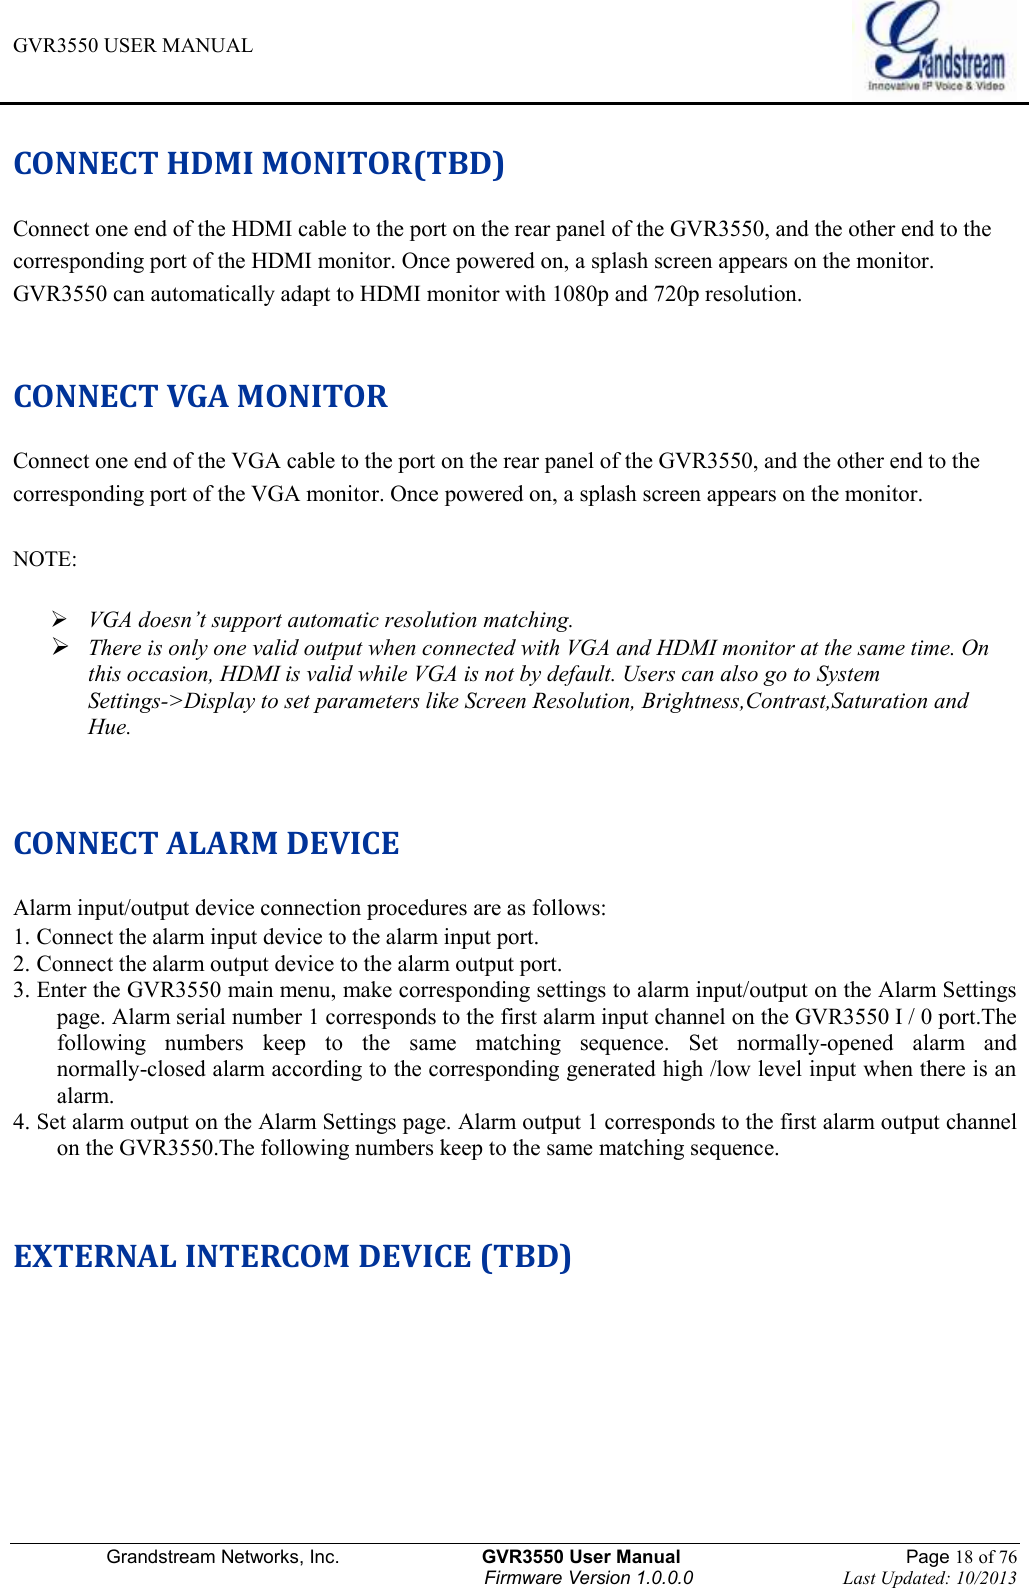 GVR3550 USER MANUAL   Grandstream Networks, Inc.                    GVR3550 User Manual                                                Page 18 of 76 Firmware Version 1.0.0.0                                Last Updated: 10/2013  CONNECT HDMI MONITOR(TBD) Connect one end of the HDMI cable to the port on the rear panel of the GVR3550, and the other end to the corresponding port of the HDMI monitor. Once powered on, a splash screen appears on the monitor. GVR3550 can automatically adapt to HDMI monitor with 1080p and 720p resolution.    CONNECT VGA MONITOR Connect one end of the VGA cable to the port on the rear panel of the GVR3550, and the other end to the corresponding port of the VGA monitor. Once powered on, a splash screen appears on the monitor.    NOTE:     VGA doesn’t support automatic resolution matching.  There is only one valid output when connected with VGA and HDMI monitor at the same time. On this occasion, HDMI is valid while VGA is not by default. Users can also go to System Settings-&gt;Display to set parameters like Screen Resolution, Brightness,Contrast,Saturation and Hue.   CONNECT ALARM DEVICE Alarm input/output device connection procedures are as follows: 1. Connect the alarm input device to the alarm input port. 2. Connect the alarm output device to the alarm output port. 3. Enter the GVR3550 main menu, make corresponding settings to alarm input/output on the Alarm Settings page. Alarm serial number 1 corresponds to the first alarm input channel on the GVR3550 I / 0 port.The following  numbers  keep  to  the  same  matching  sequence.  Set  normally-opened  alarm  and normally-closed alarm according to the corresponding generated high /low level input when there is an alarm. 4. Set alarm output on the Alarm Settings page. Alarm output 1 corresponds to the first alarm output channel on the GVR3550.The following numbers keep to the same matching sequence.  EXTERNAL INTERCOM DEVICE (TBD) 